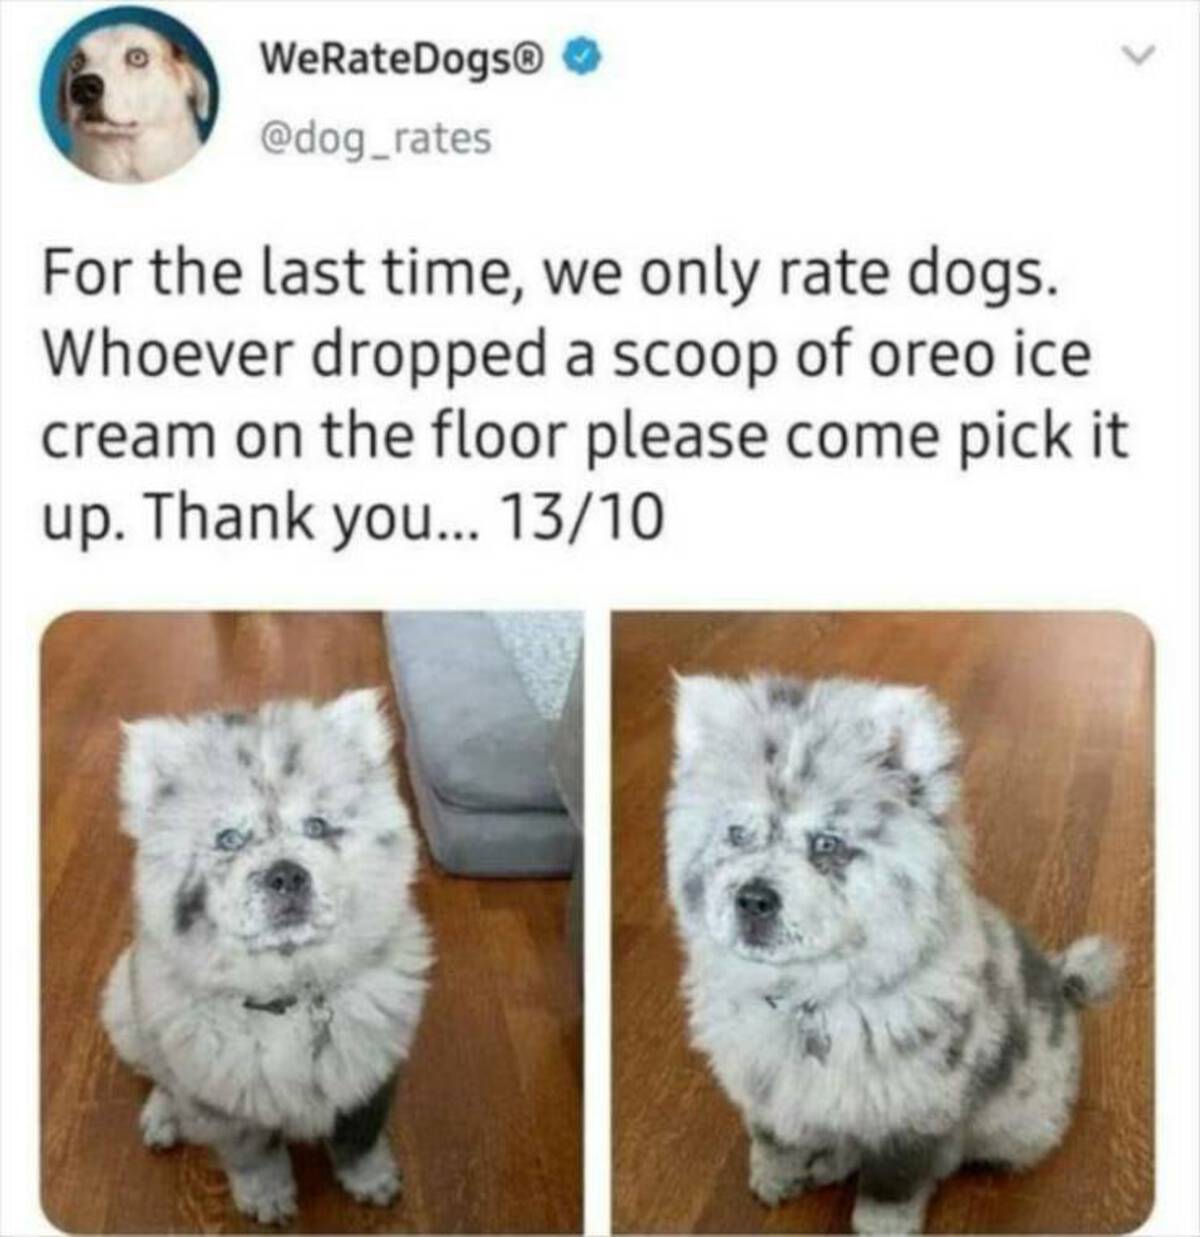 pomeranian - WeRateDogs For the last time, we only rate dogs. Whoever dropped a scoop of oreo ice cream on the floor please come pick it up. Thank you... 1310